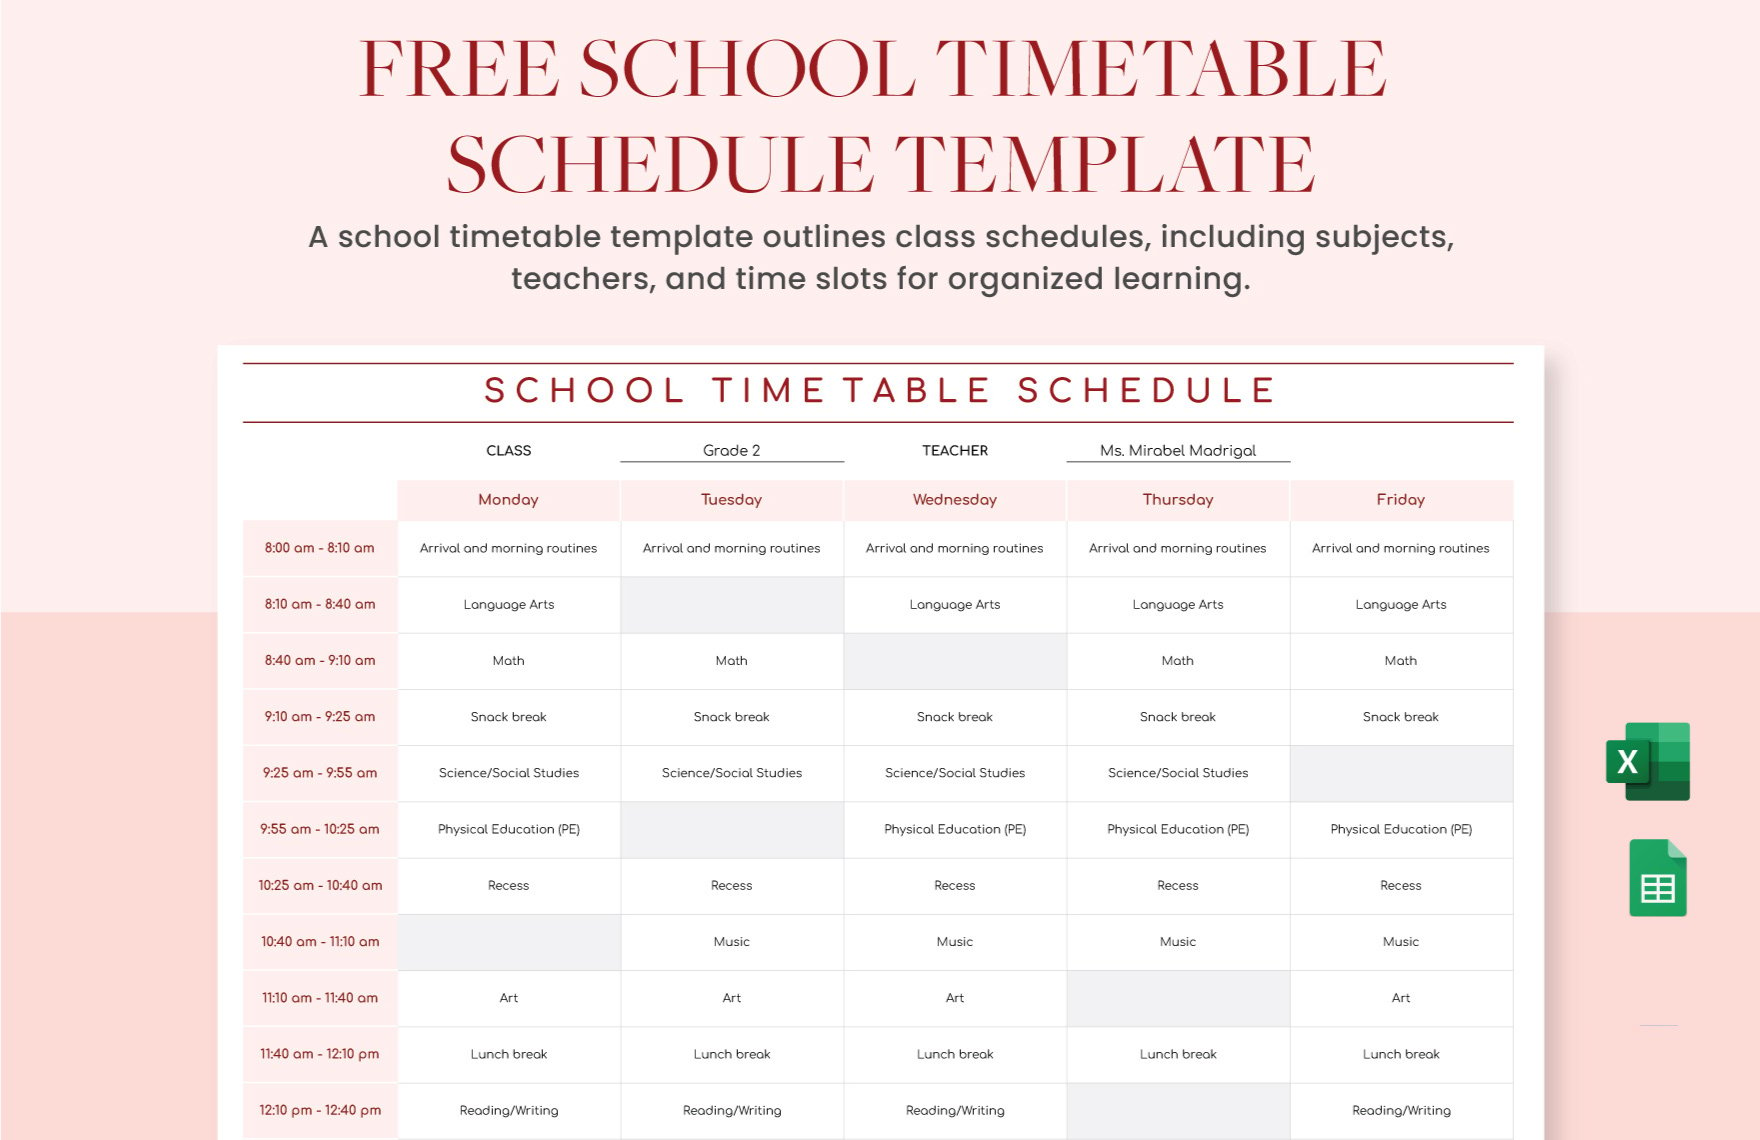 Free School Timetable Schedule Template